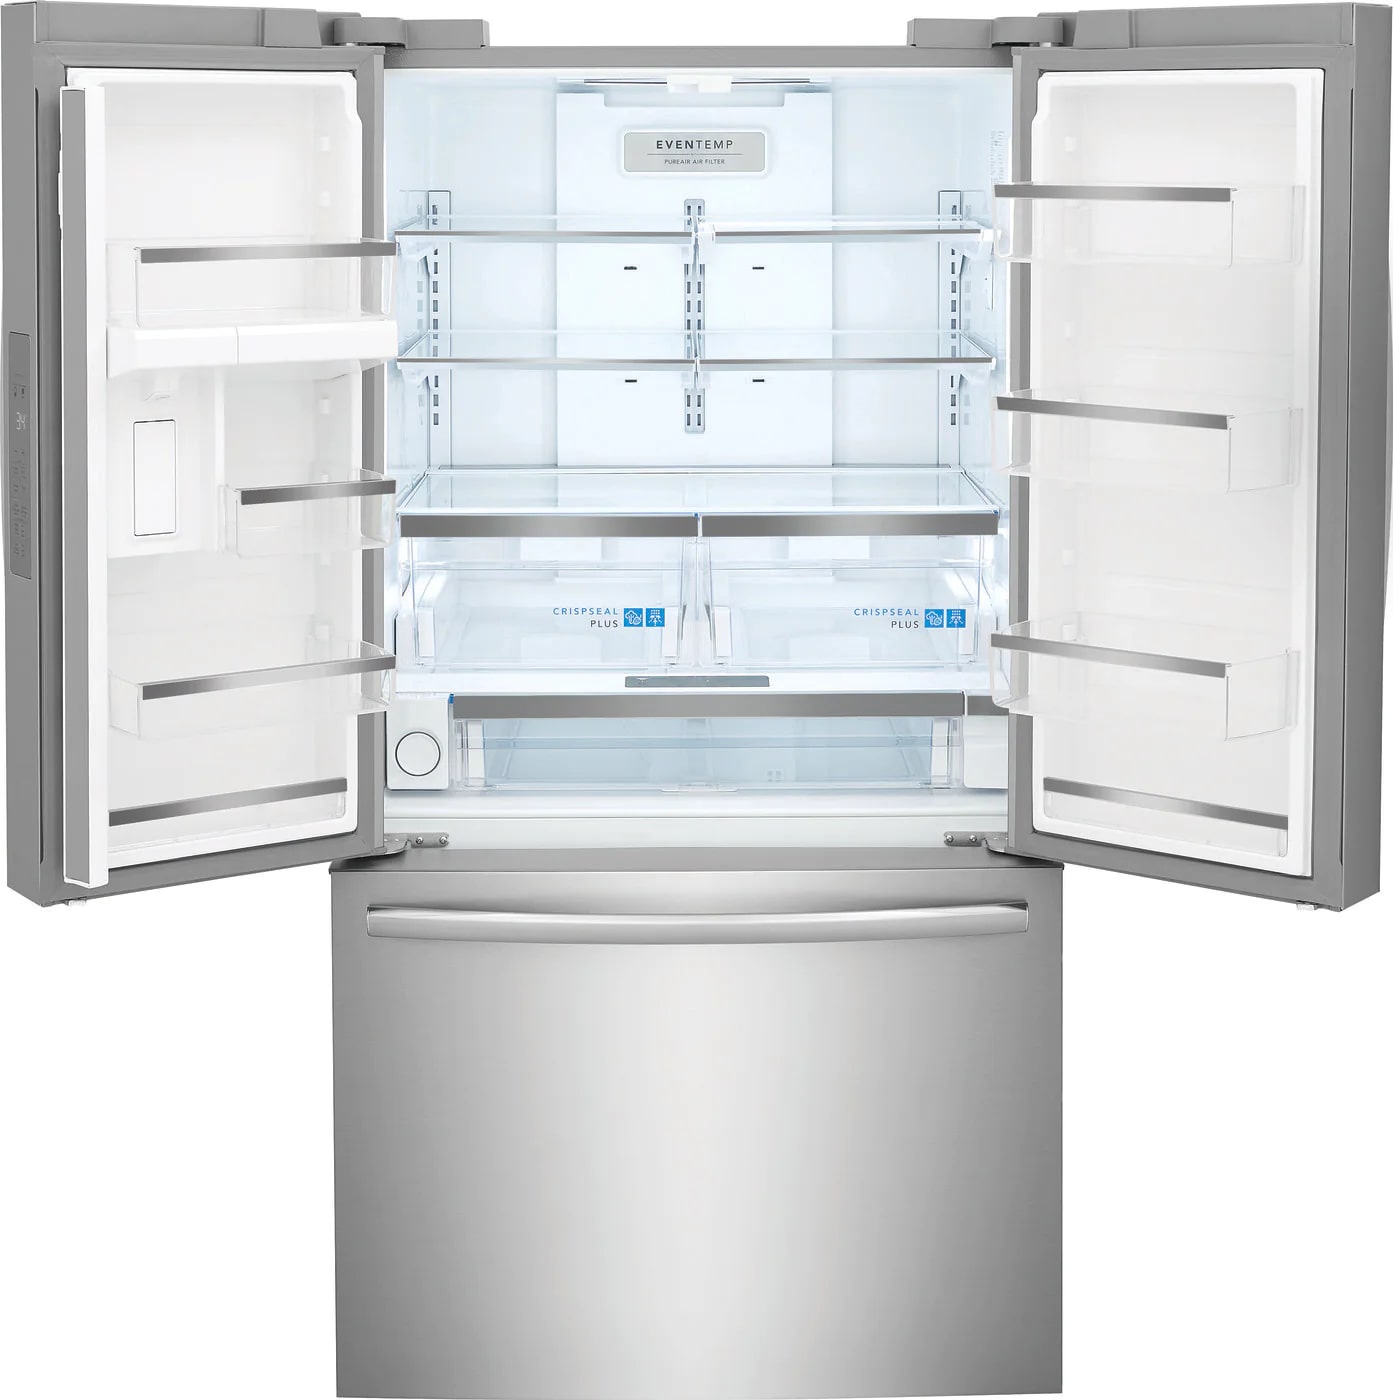 Frigidaire Gallery - 36 Inch 28.8 cu. ft French Door Refrigerator in Stainless - GRFN2853AF